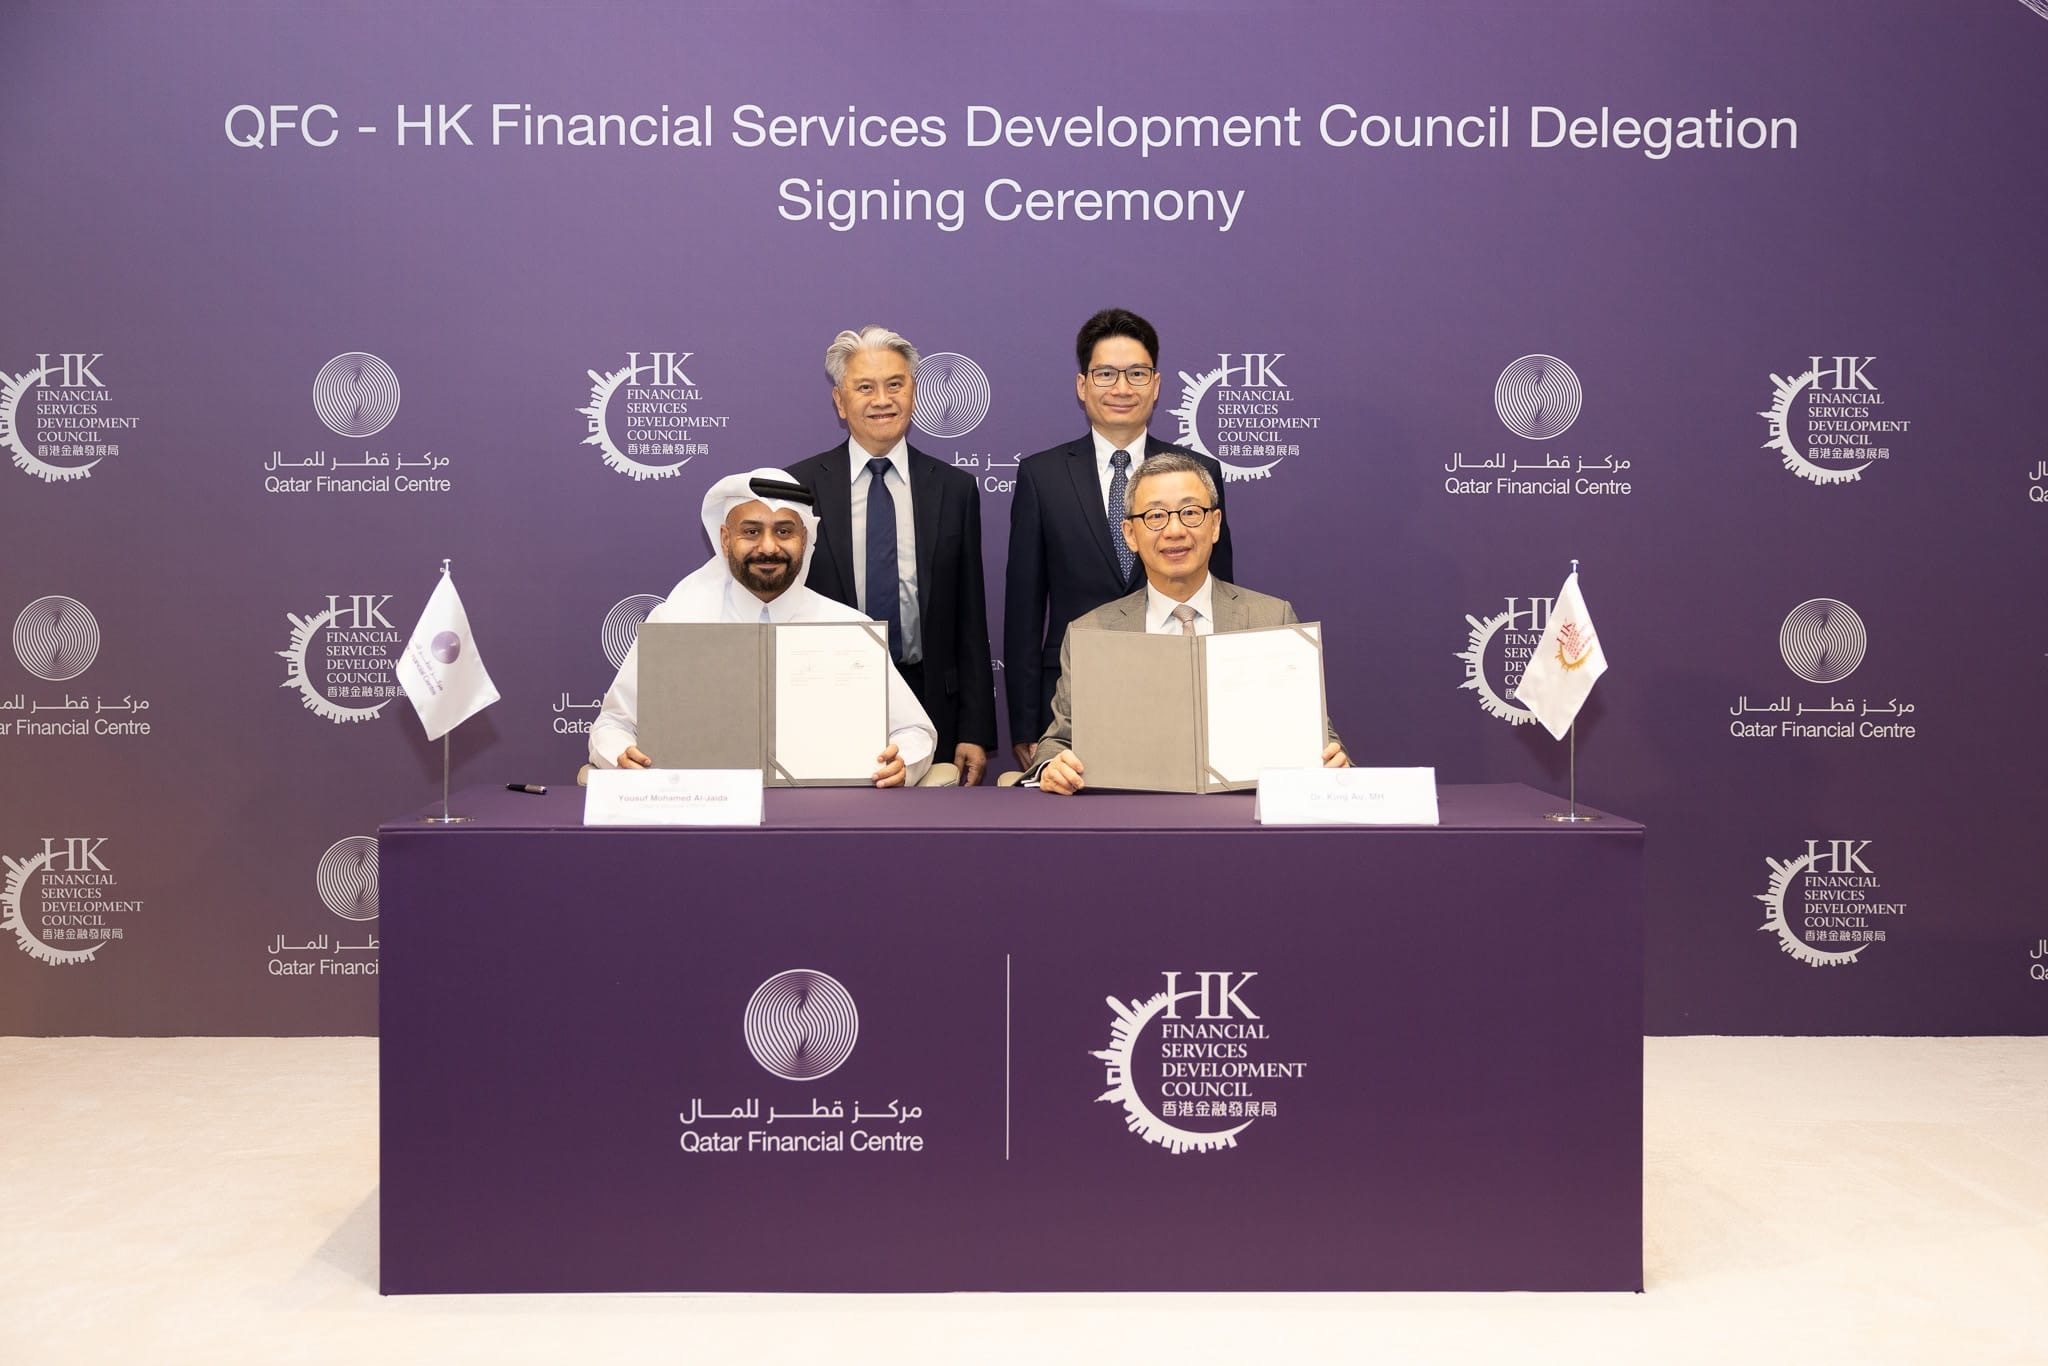 Back row: (left) Daniel Fung, vice chairman of the FSDC and Joseph Chan, Hong Kong Under Secretary for Financial Services and the Treasury. Front row: (left) Yousuf Mohamed Al-Jaida, CEO of Qatar Financial Centre and Dr King Au, Executive Director of the FSDC. Photo: Handout